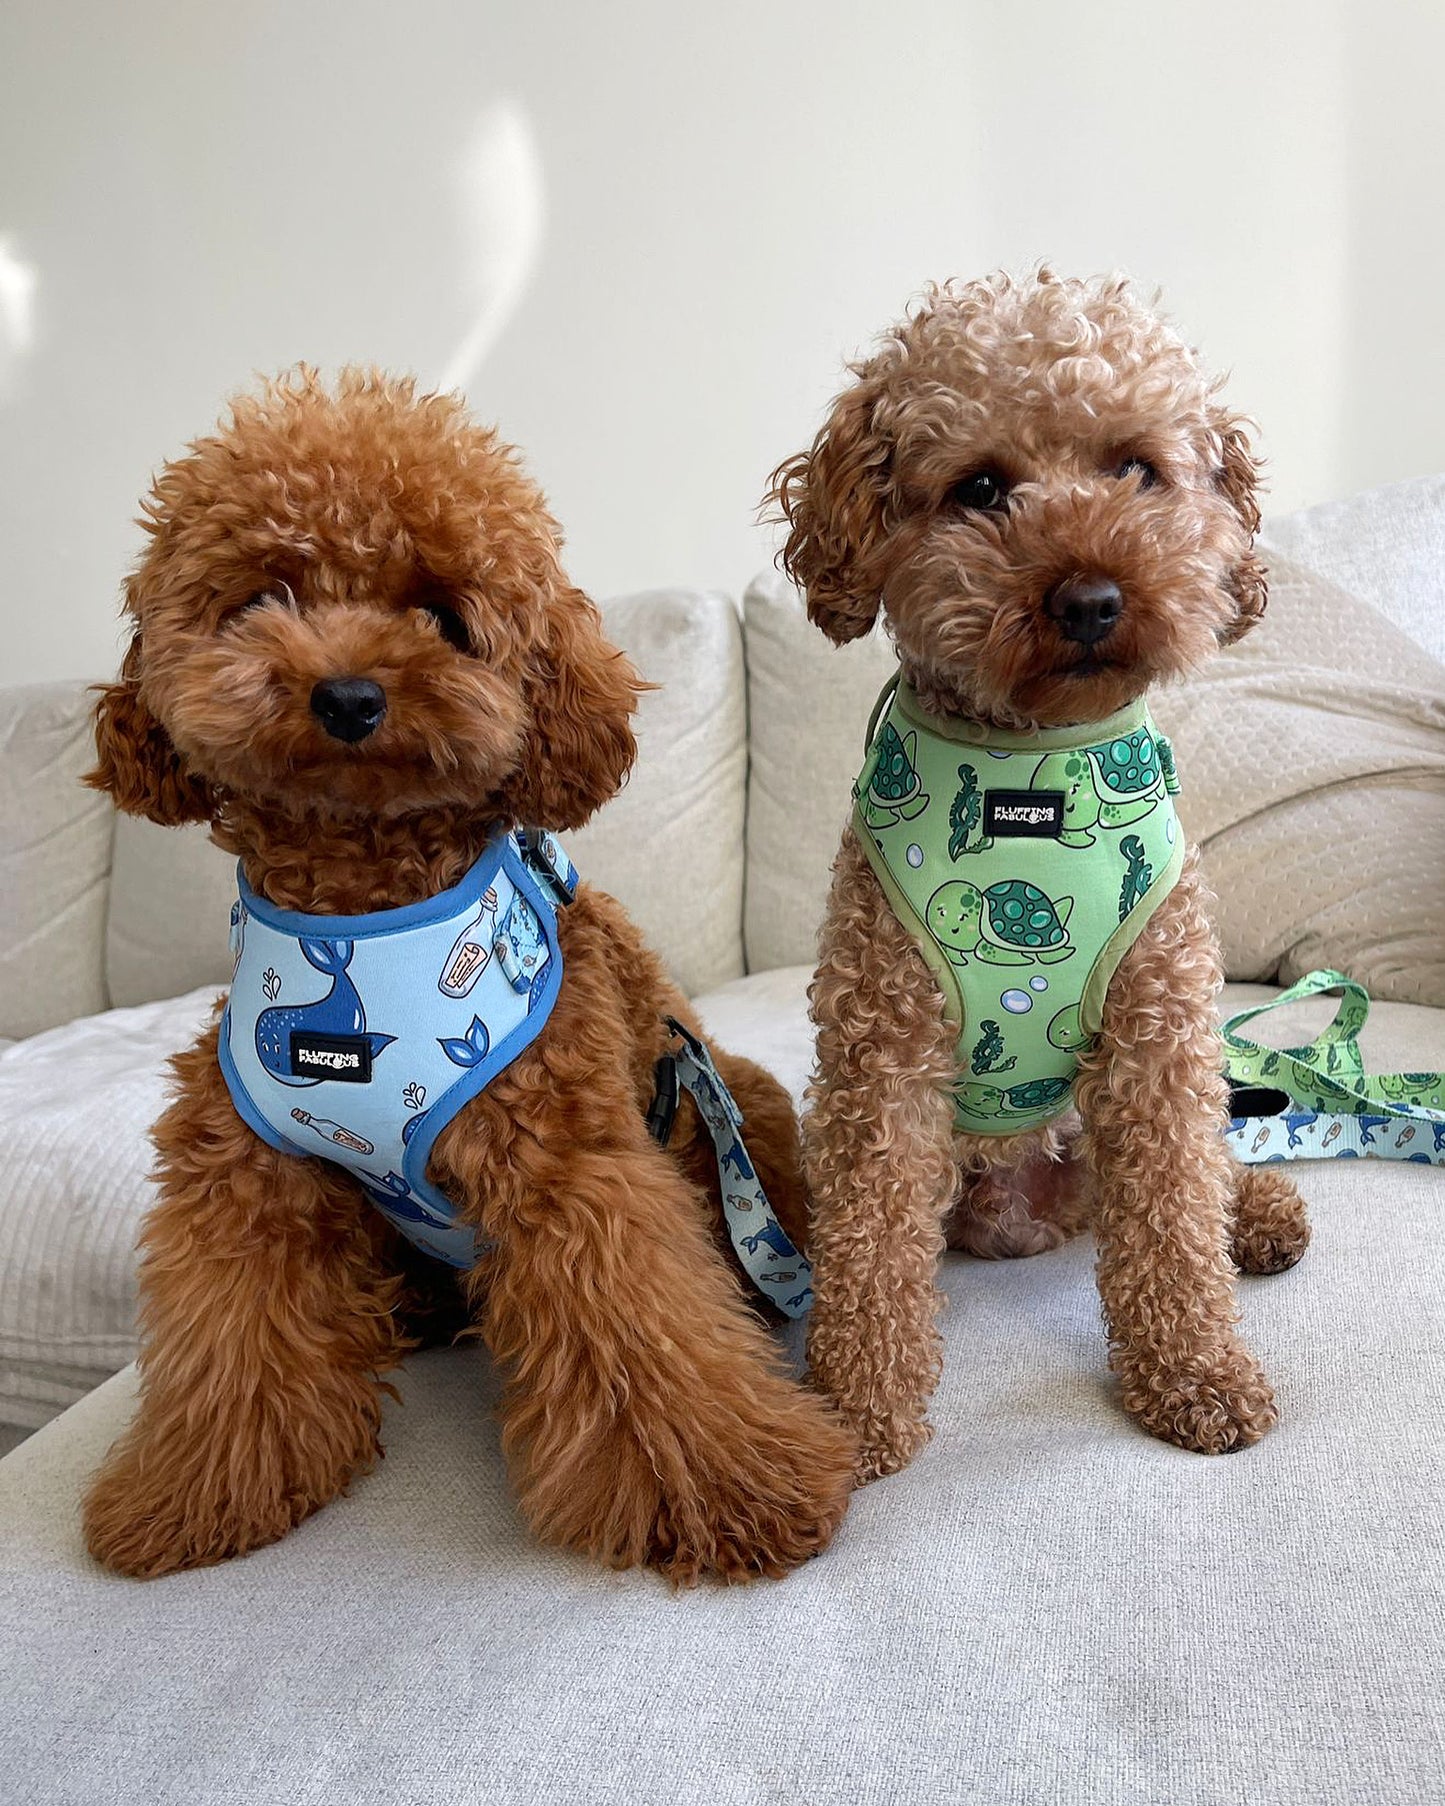 2 poodles wearing matching dog harness and lead 